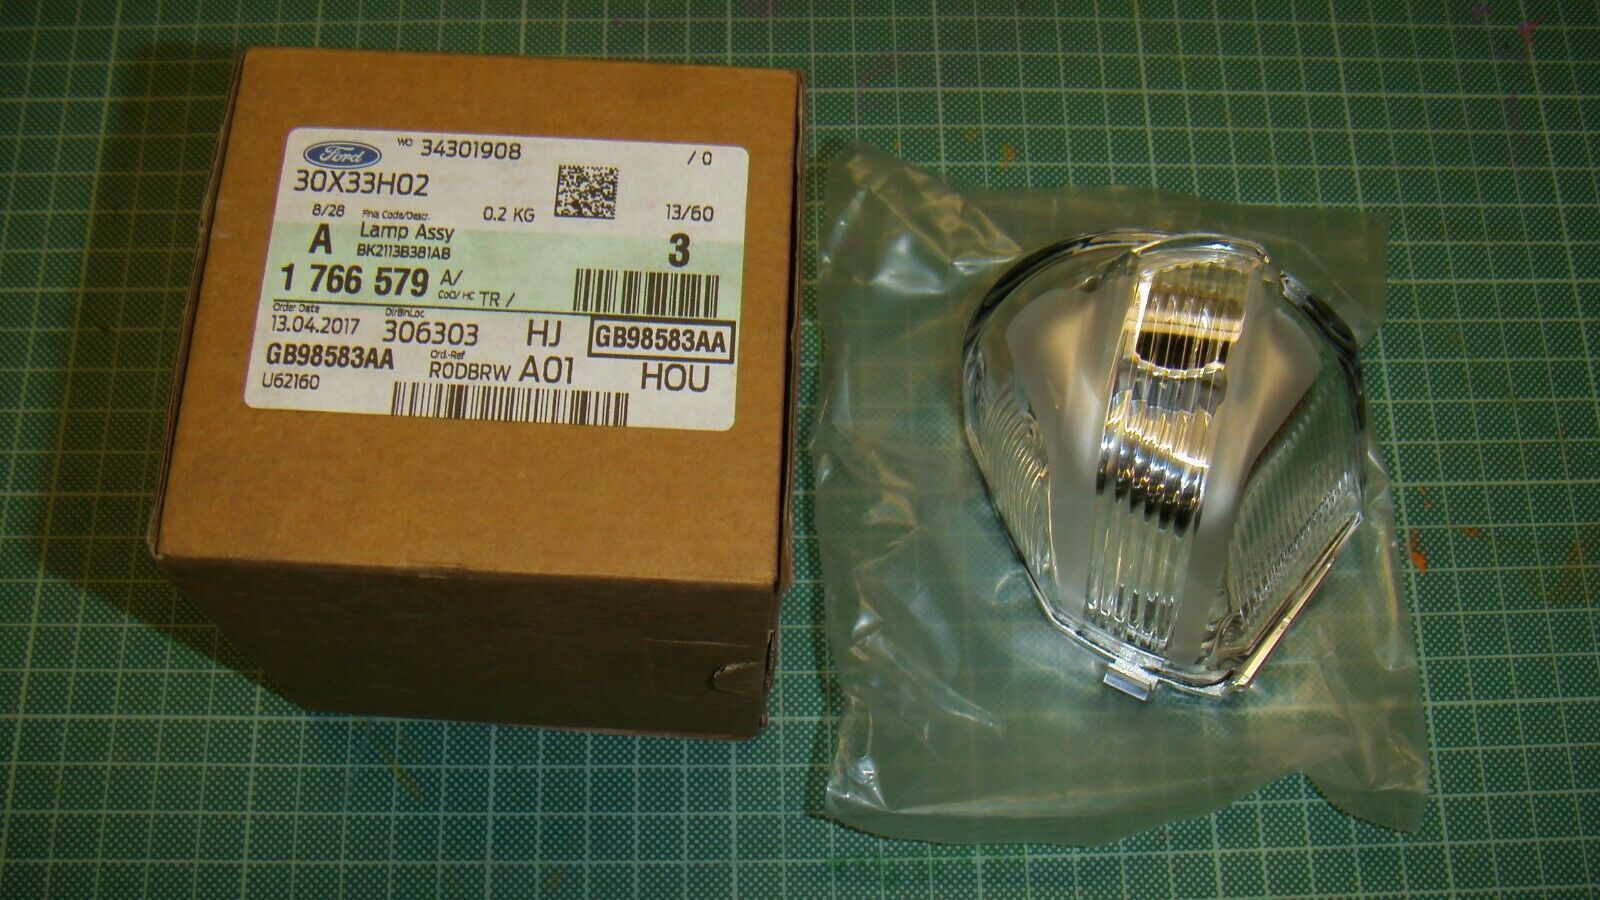 FORD TRANSIT CUSTOM RIGHT WING MIRROR CLEAR INDICATOR LENS RH SIDE 1766579